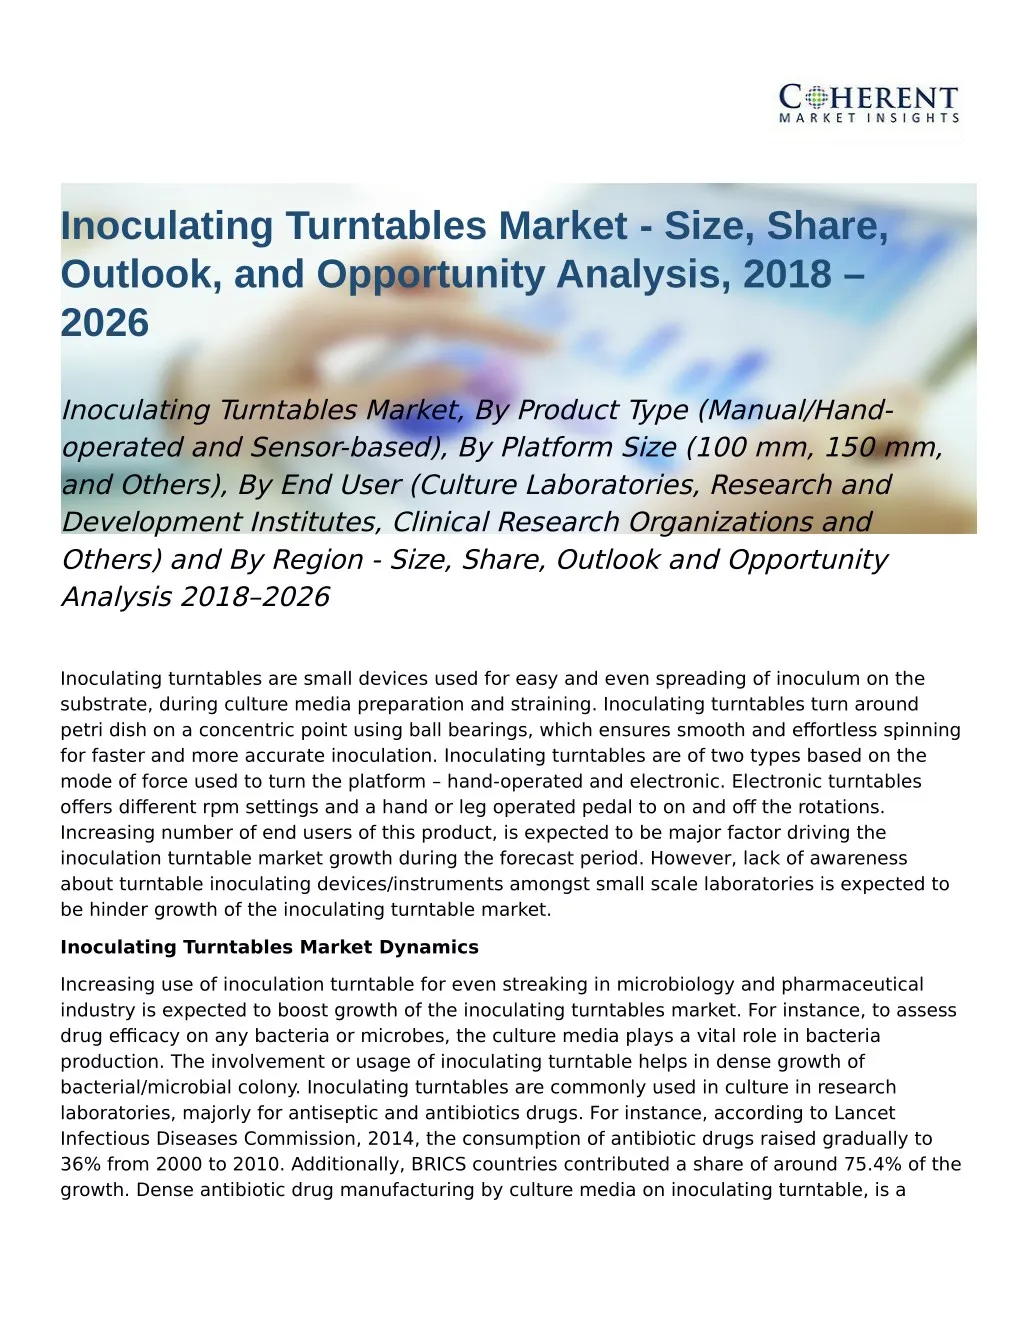 inoculating turntables market size share outlook